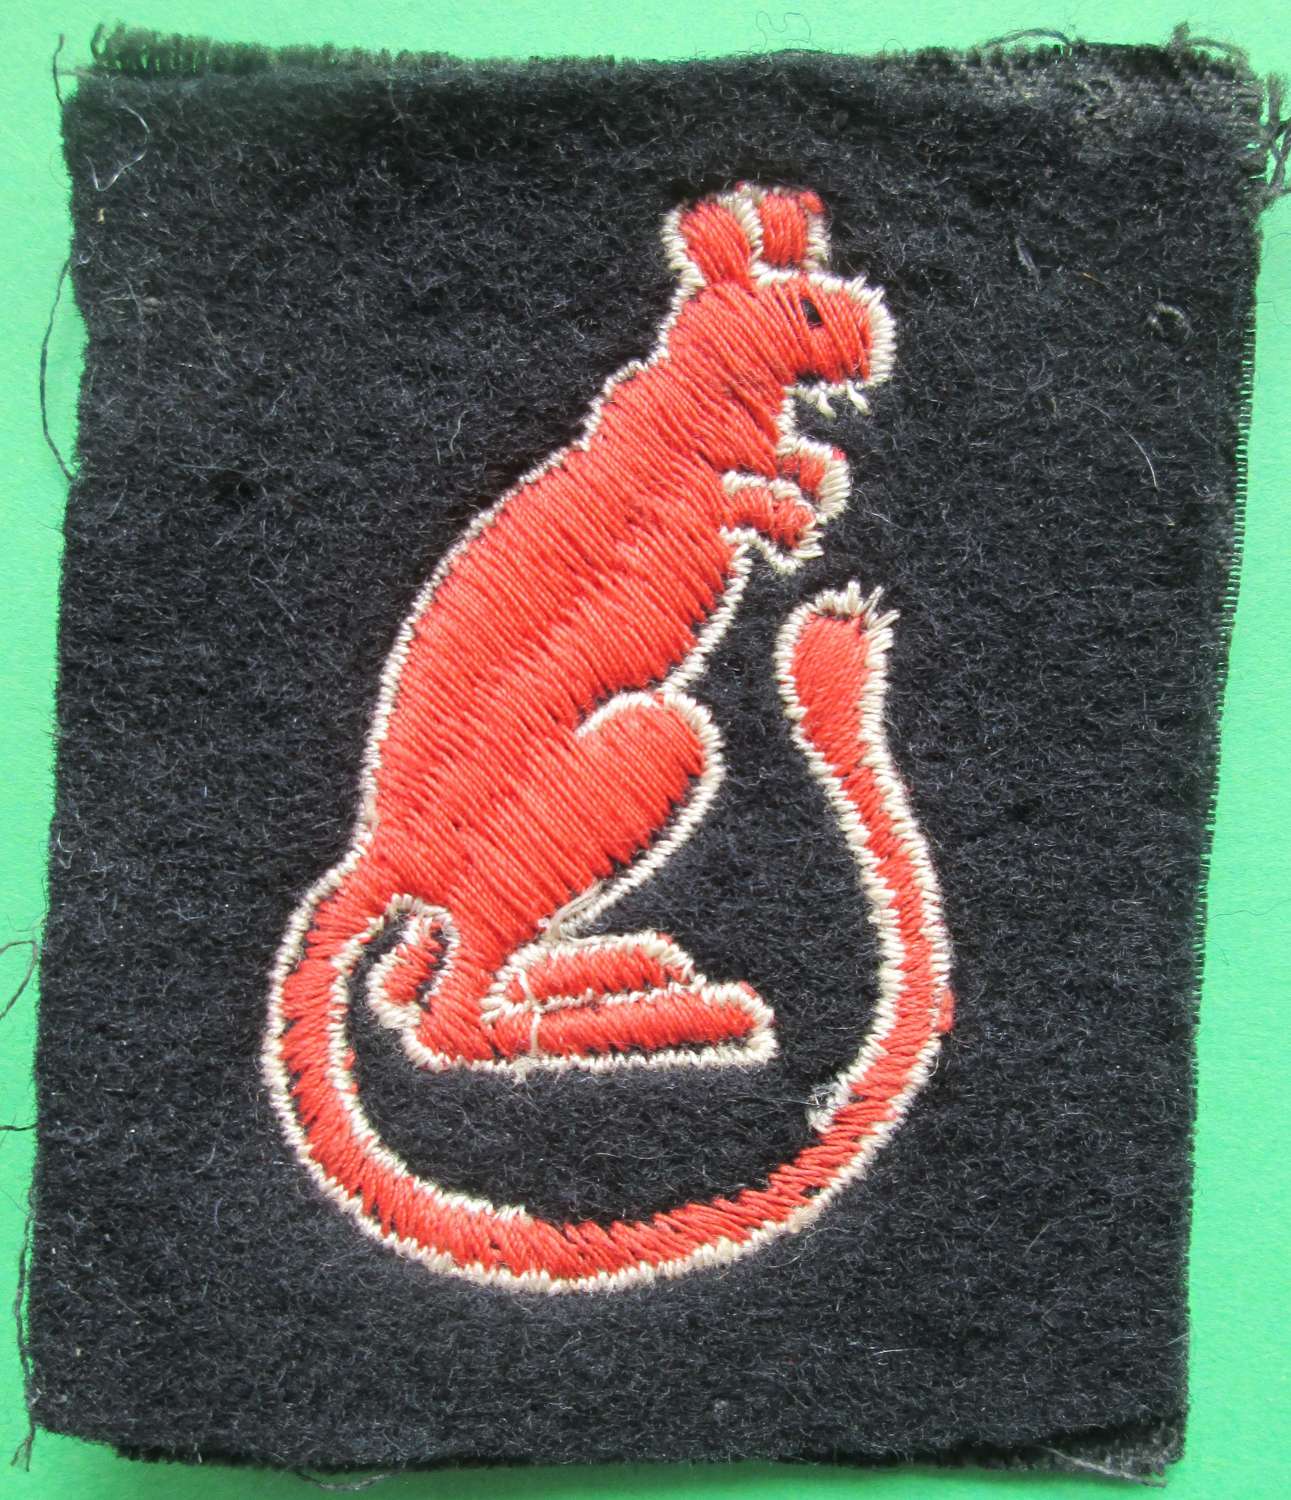 A 7TH ARMOURED DIVISION FORMATION PATCH